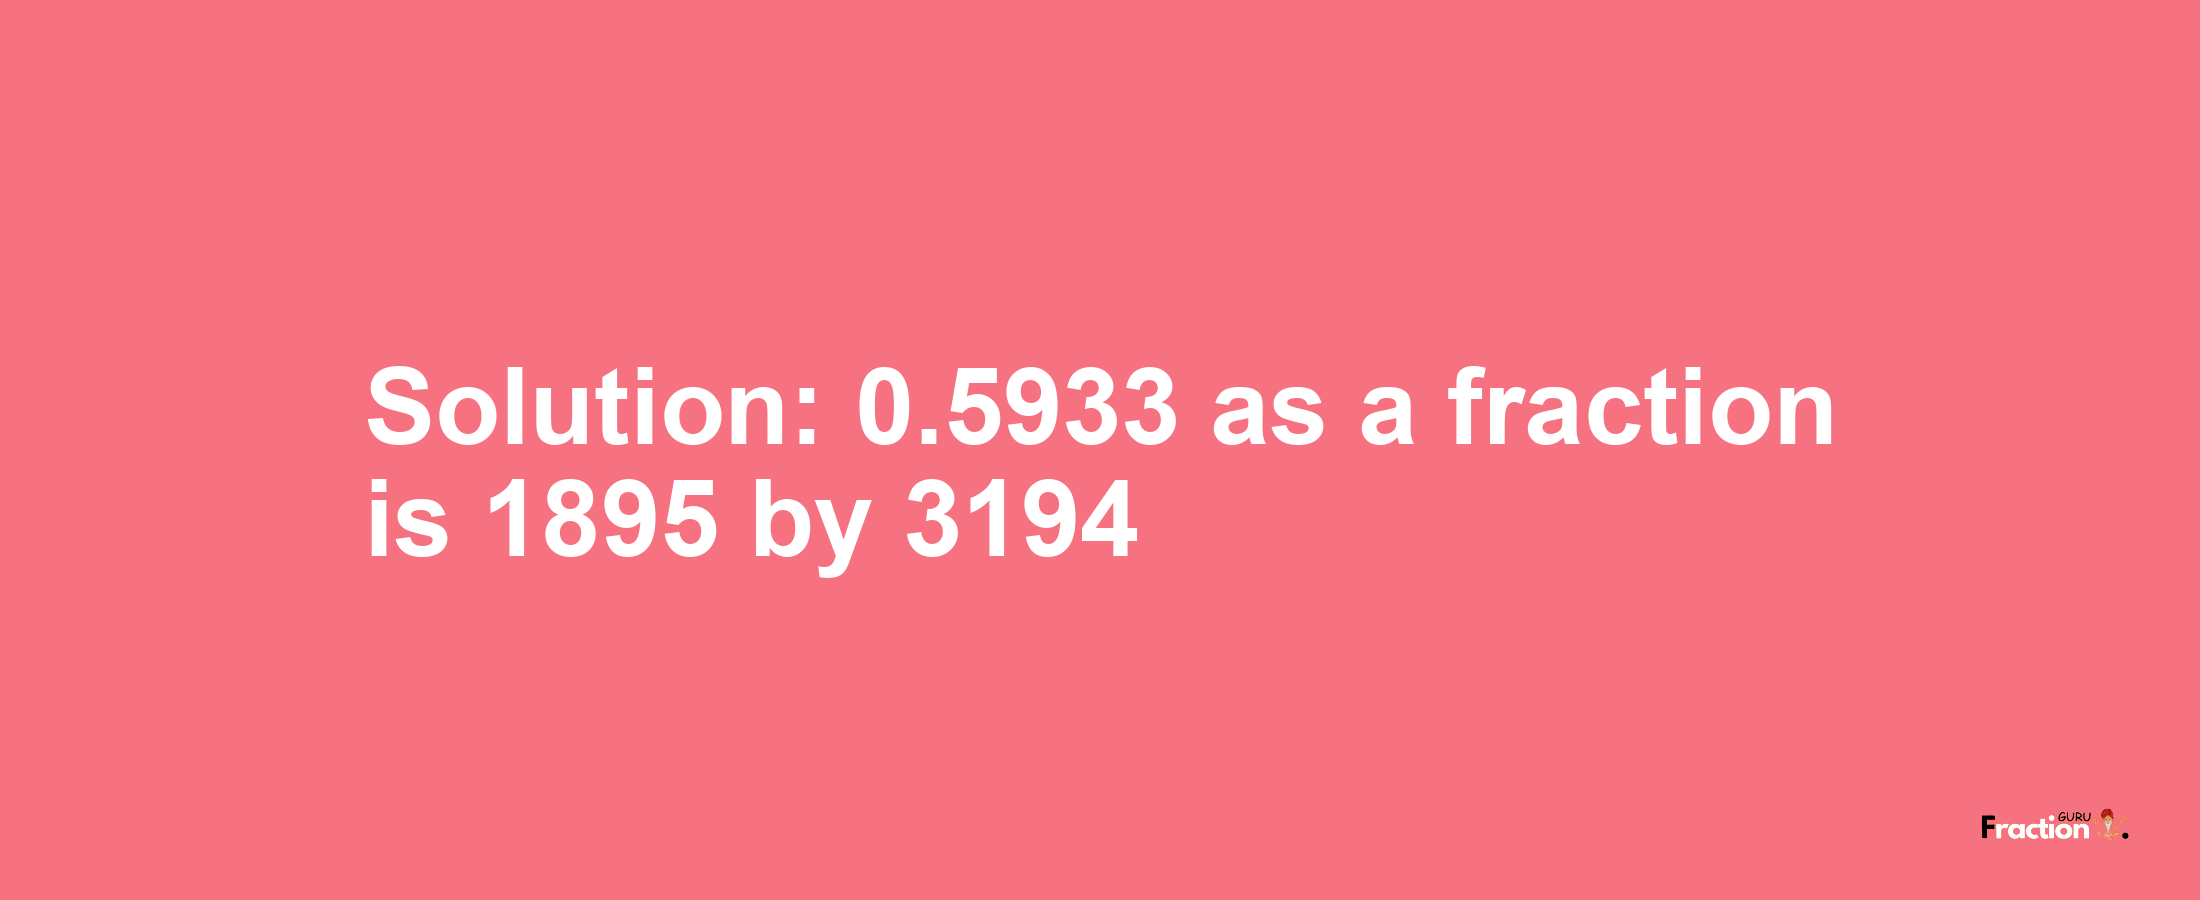 Solution:0.5933 as a fraction is 1895/3194